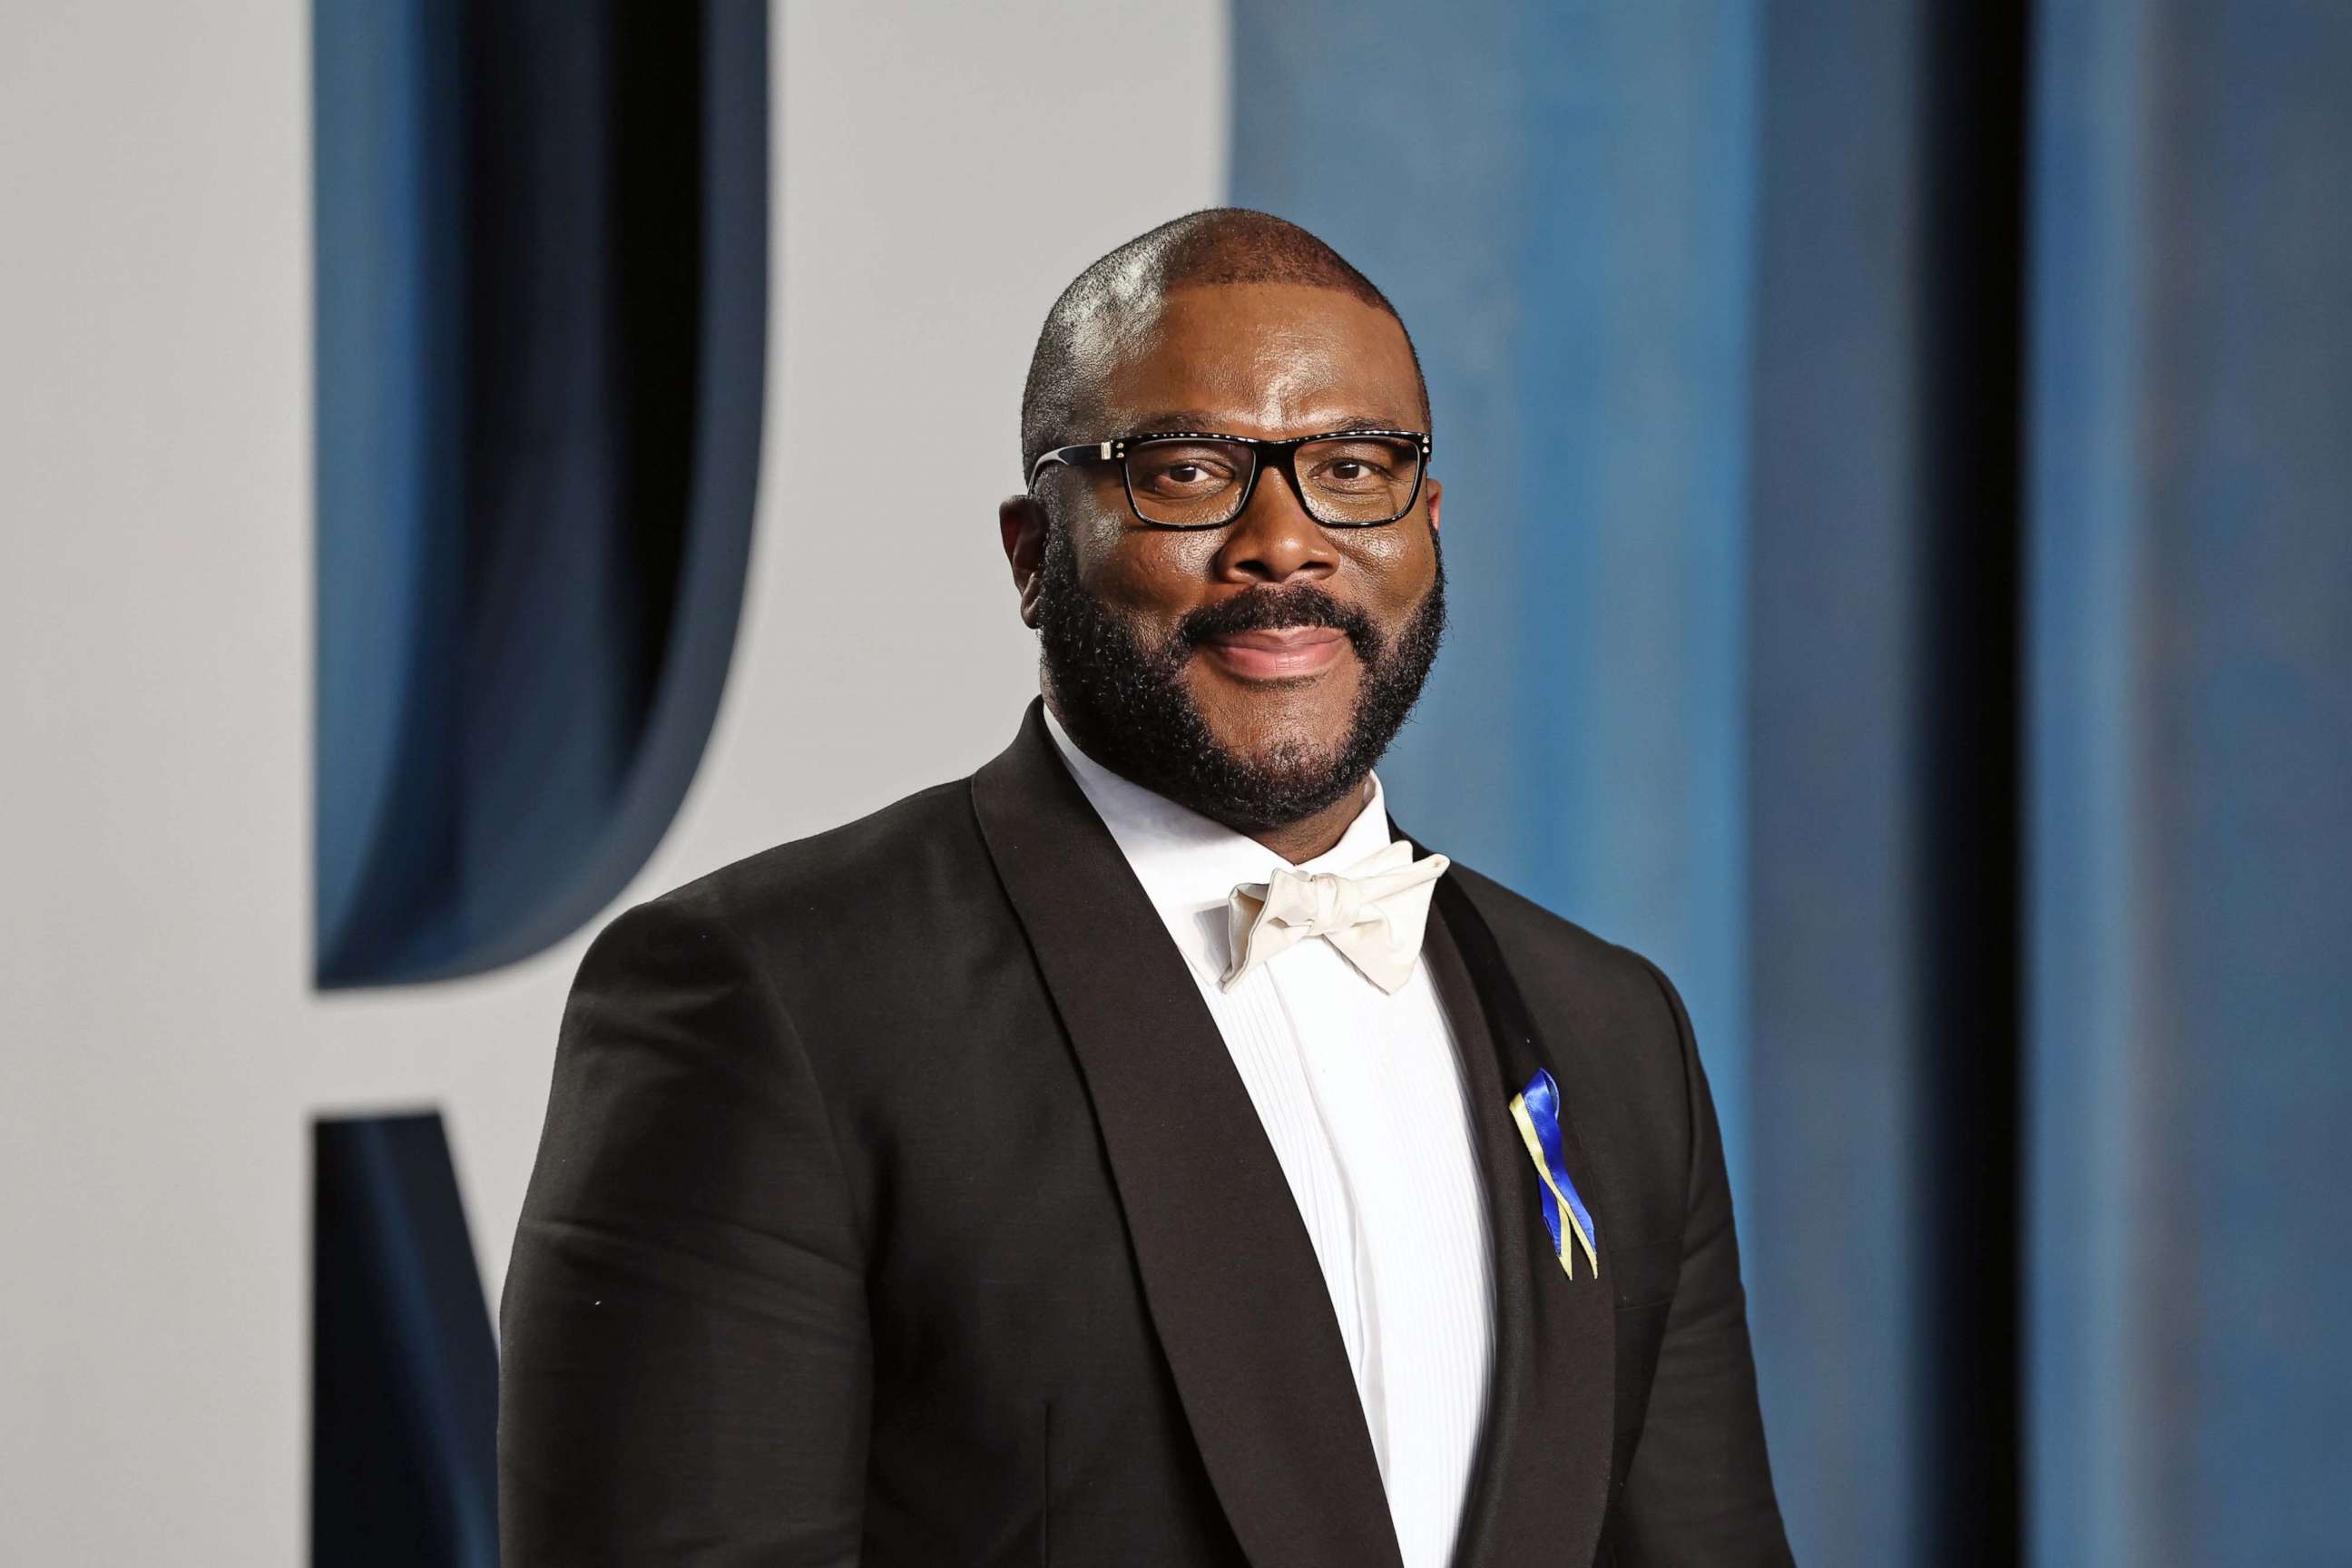 PHOTO: Tyler Perry attends the 2022 Vanity Fair Oscar Party at Wallis Annenberg Center for the Performing Arts on March 27, 2022 in Beverly Hills, Calif.